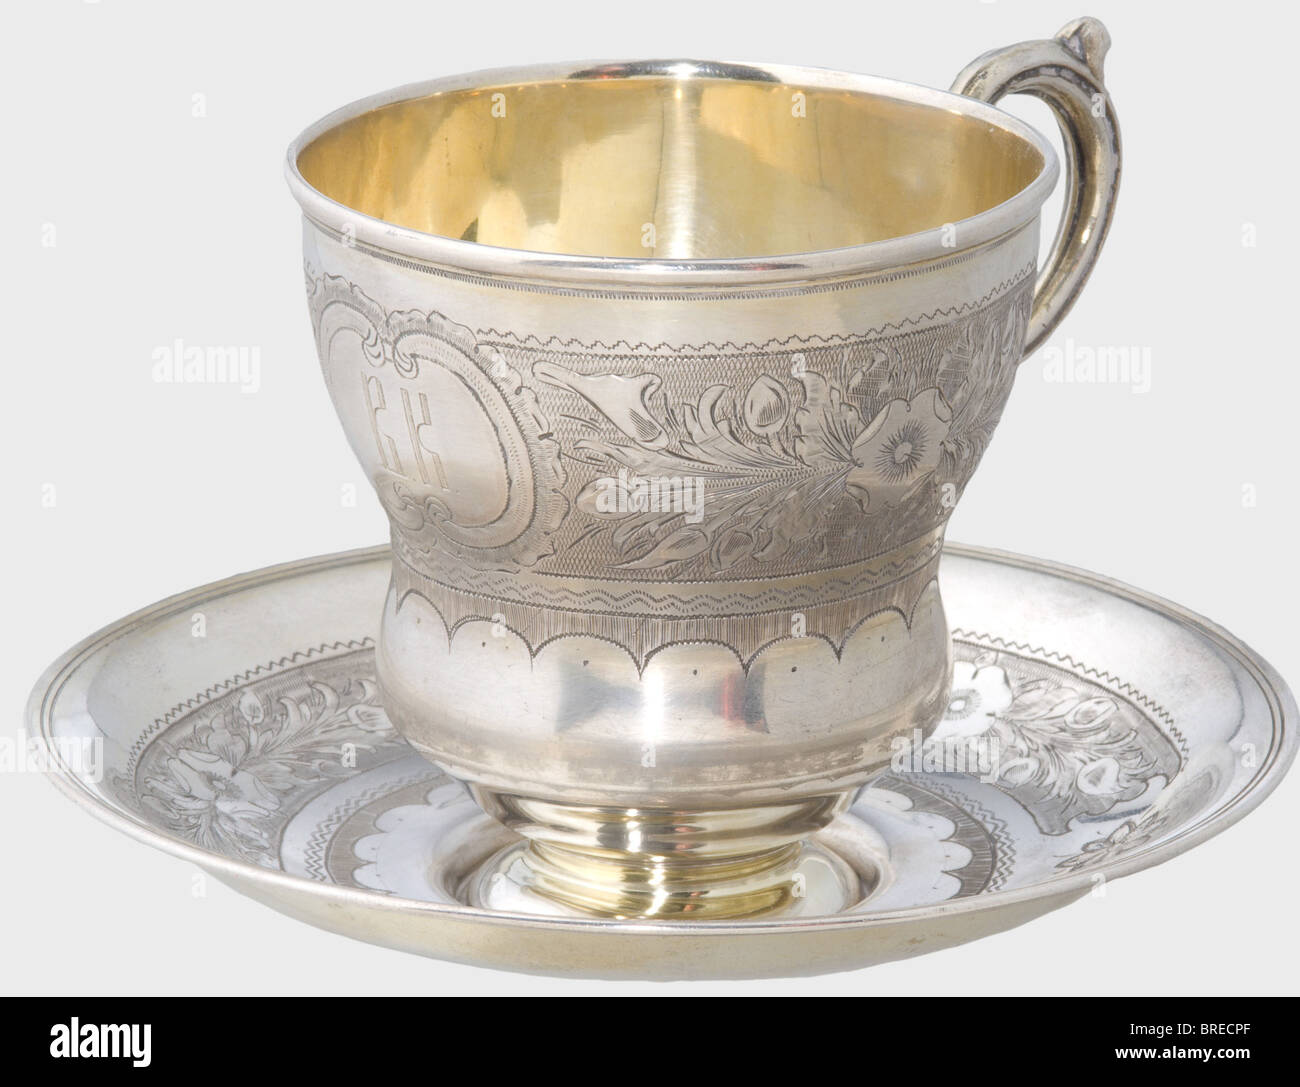 A silver tea cup and saucer, Moscow, 1867. Silver, gilt in places and with delicate floral engraving. The cup displays the monogram 'V.K.' in front. Each piece bears the master's mark, 'NA', the Moscow hallmark for '84' zolotniki, the inspecting master's mark 'BC', and the year '1867' on the bottom. Height of the cup 8.5 cm. Diameter of the saucer 13.5 cm. Total weight 199 g. Provenance: Grand Duchess Vera Konstantinovna Romanova (1854 - 1912). historic, historical, 19th century, dish, dishes, cup, cups, object, objects, stills, clipping, clippings, cut out, cu, Stock Photo